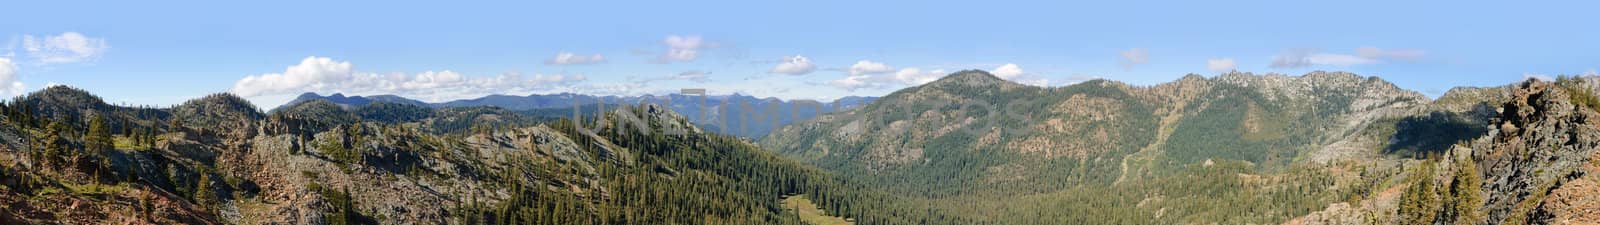 panorama of the Trinity Alps by jeffbanke